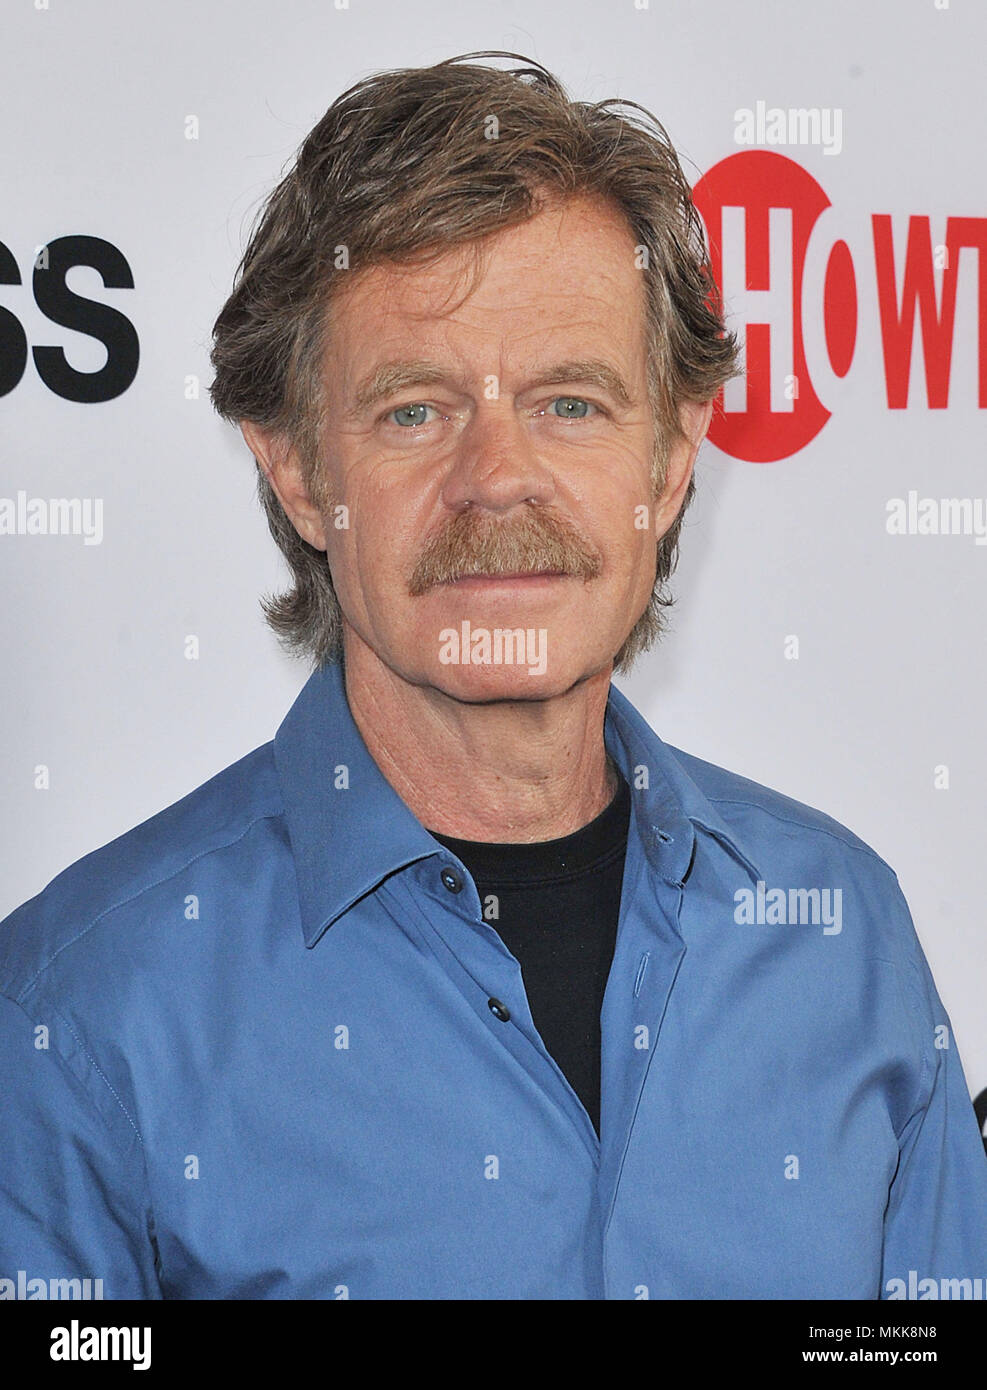 William H Macy  arriving the Shameless Premiere at the Academy Of Television in North Hollywood.a William H Macy 108 Red Carpet Event, Vertical, USA, Film Industry, Celebrities,  Photography, Bestof, Arts Culture and Entertainment, Topix Celebrities fashion /  Vertical, Best of, Event in Hollywood Life - California,  Red Carpet and backstage, USA, Film Industry, Celebrities,  movie celebrities, TV celebrities, Music celebrities, Photography, Bestof, Arts Culture and Entertainment,  Topix, headshot, vertical, one person,, from the year , 2013, inquiry tsuni@Gamma-USA.com Stock Photo